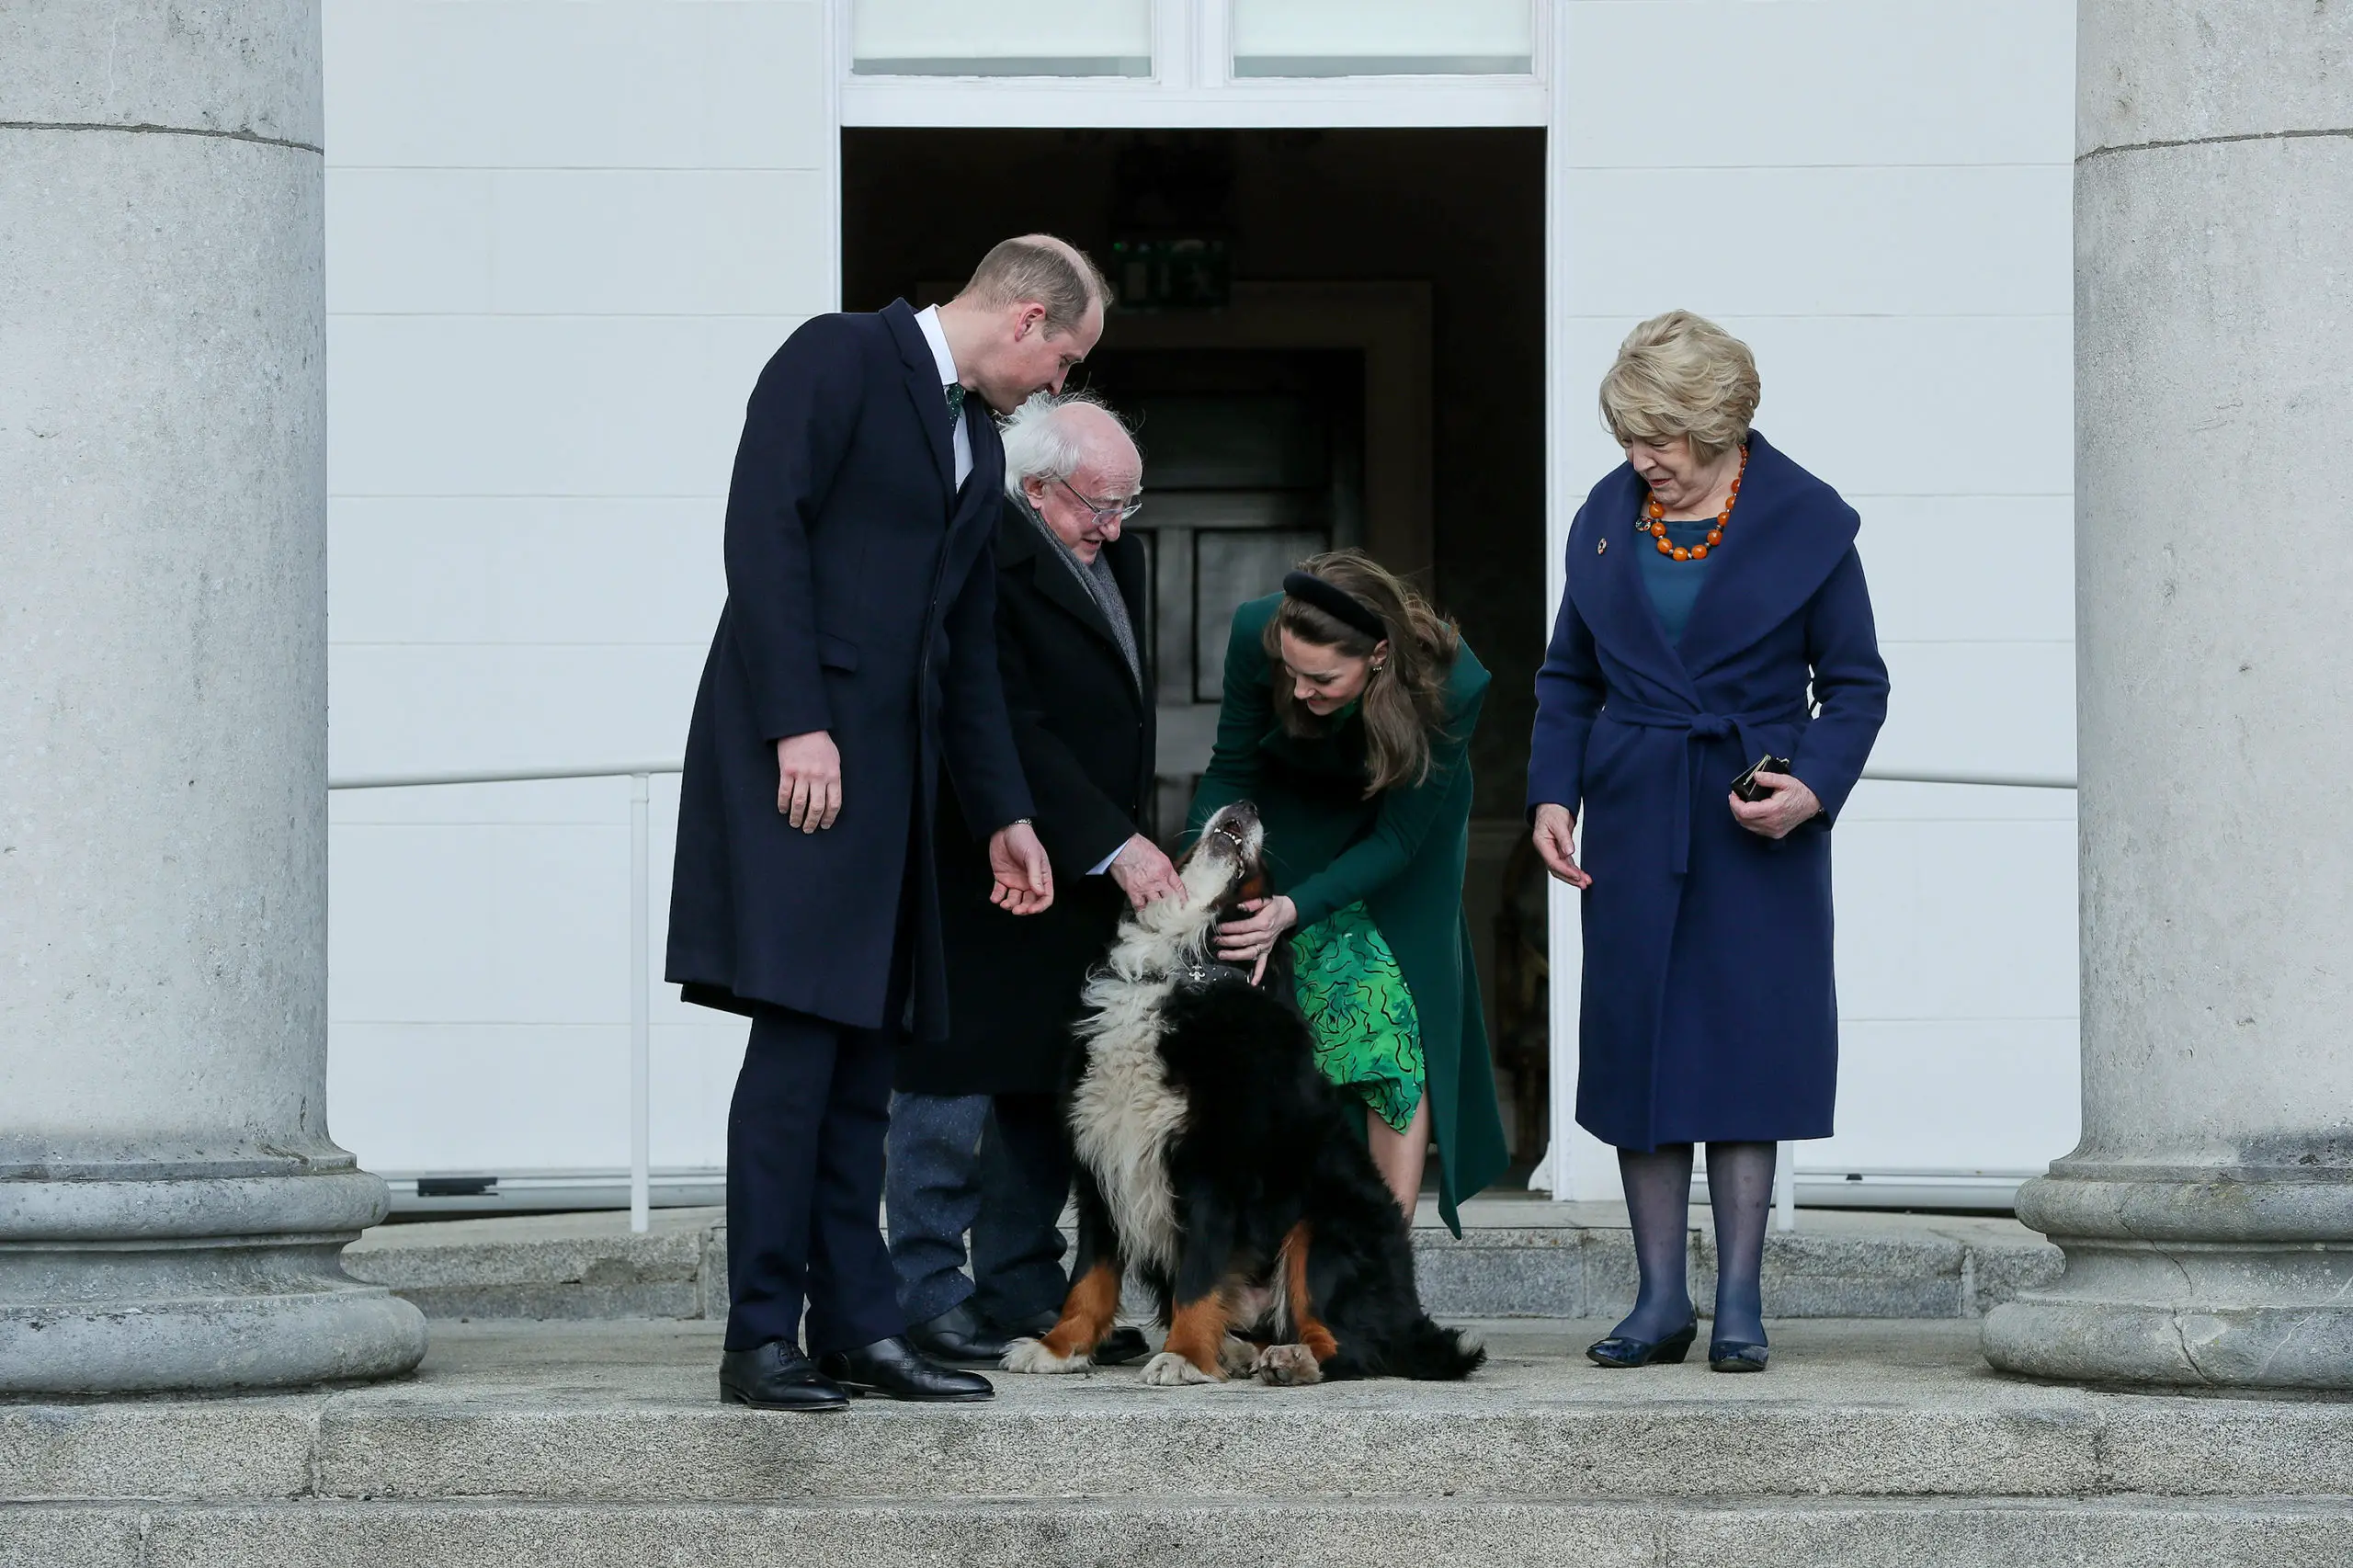 The Duke and Duchess of Cambridge was warmly welcomed by the Irish President and First Lady